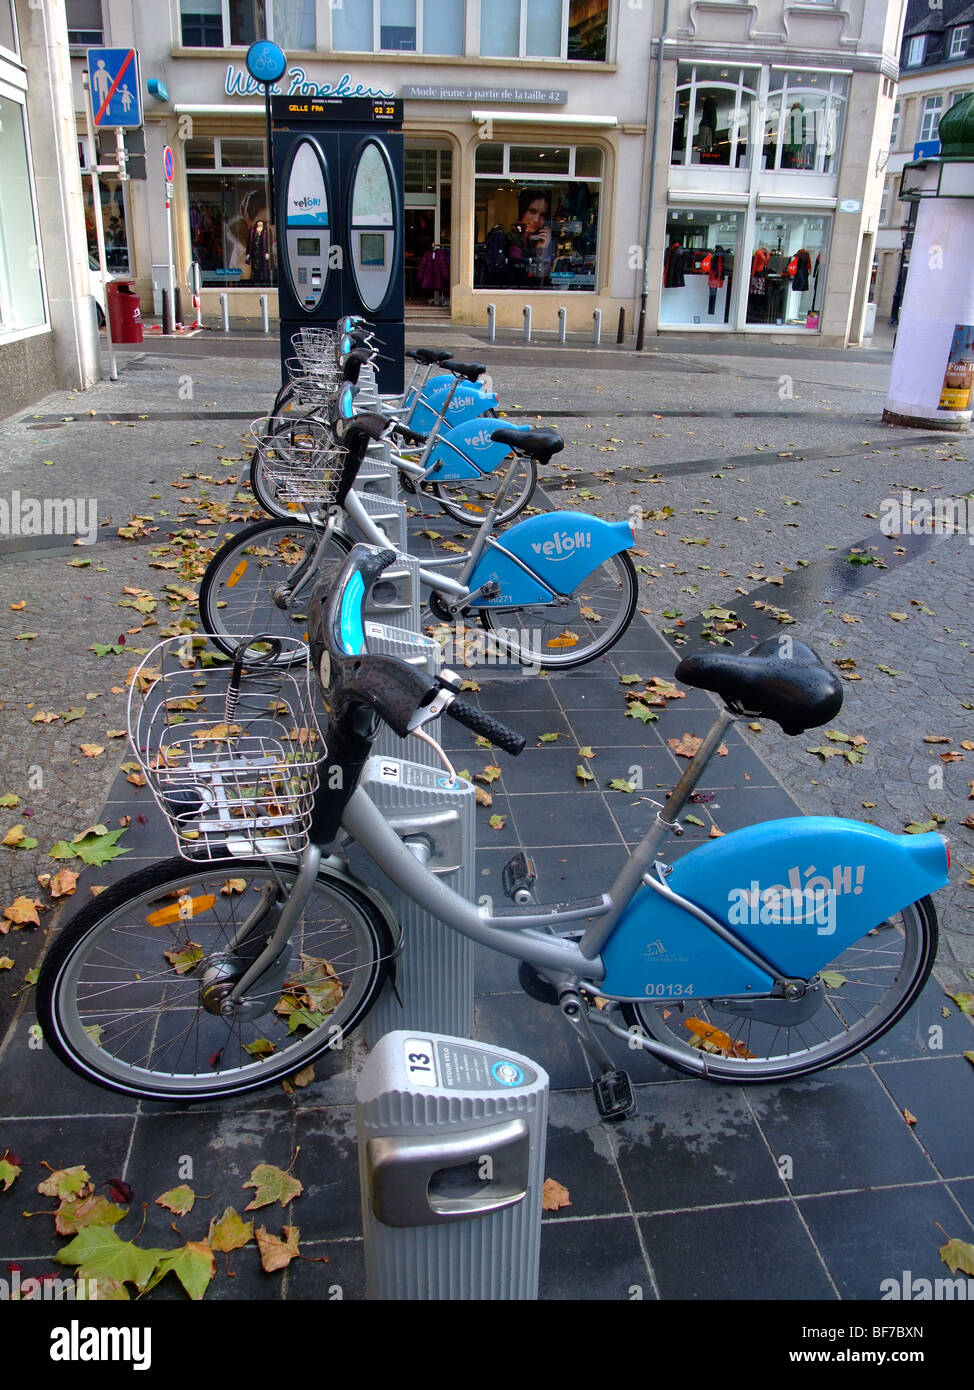 Veloh" a new public rental bicycles in Luxembourg city - Europe Stock Photo  - Alamy